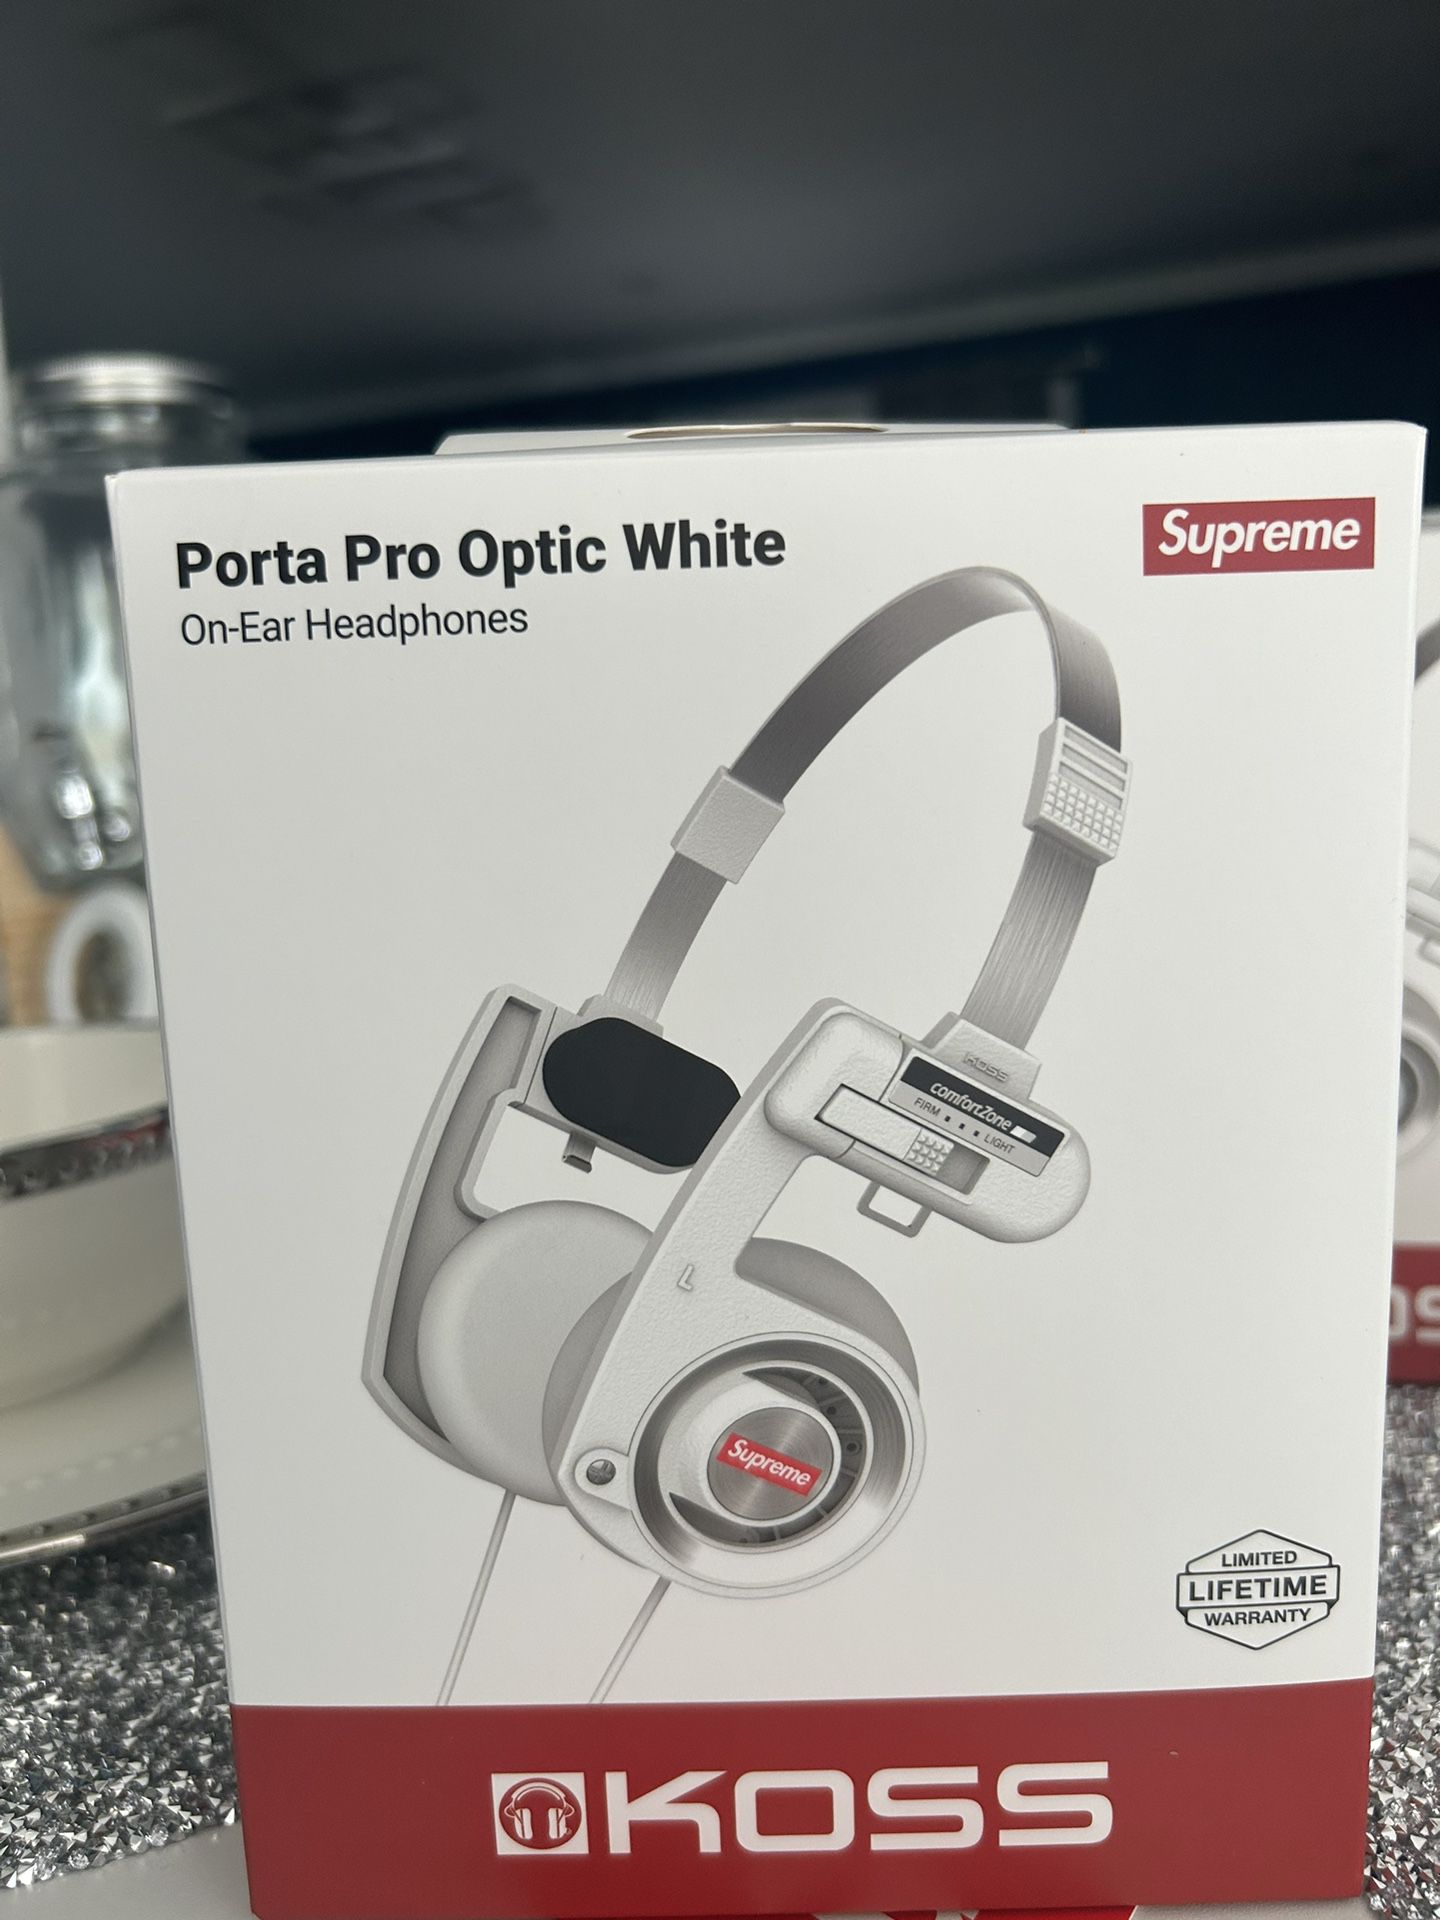 Supreme Koss headphones for Sale in Queens, NY - OfferUp